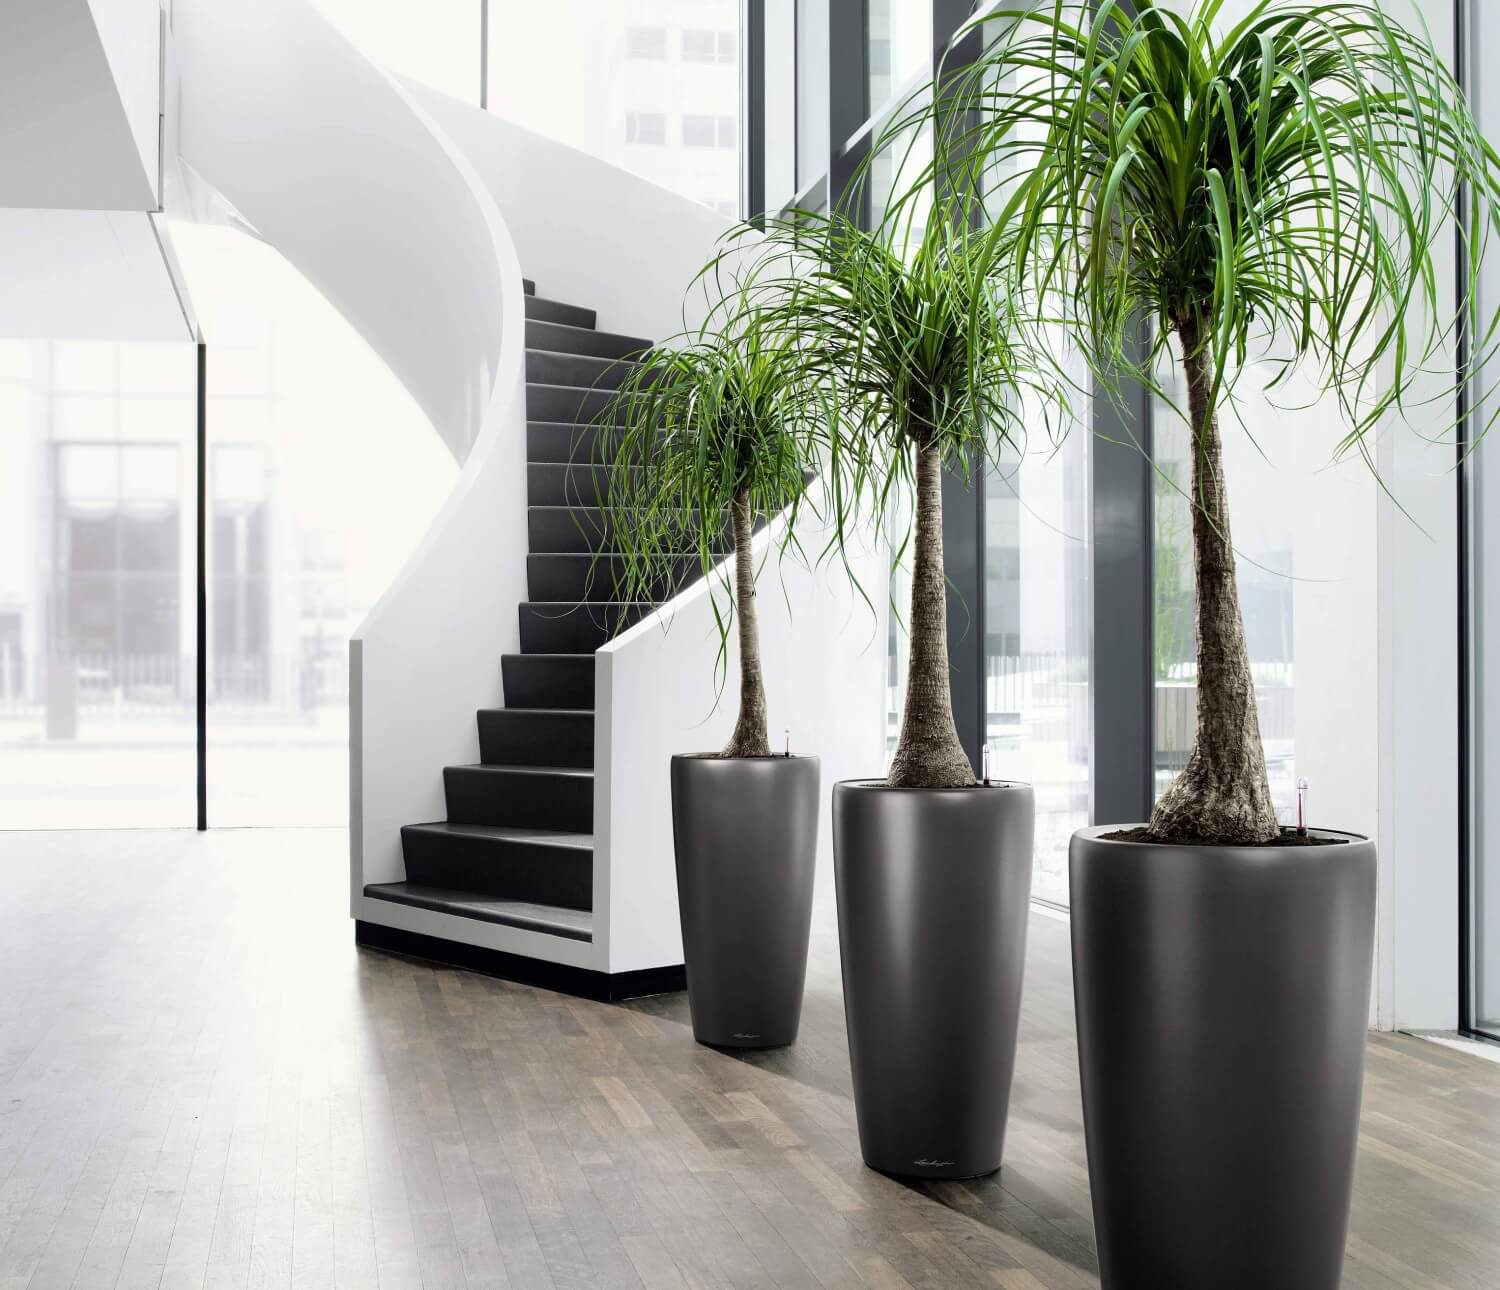 Decorating the Interior with Potted Plants 